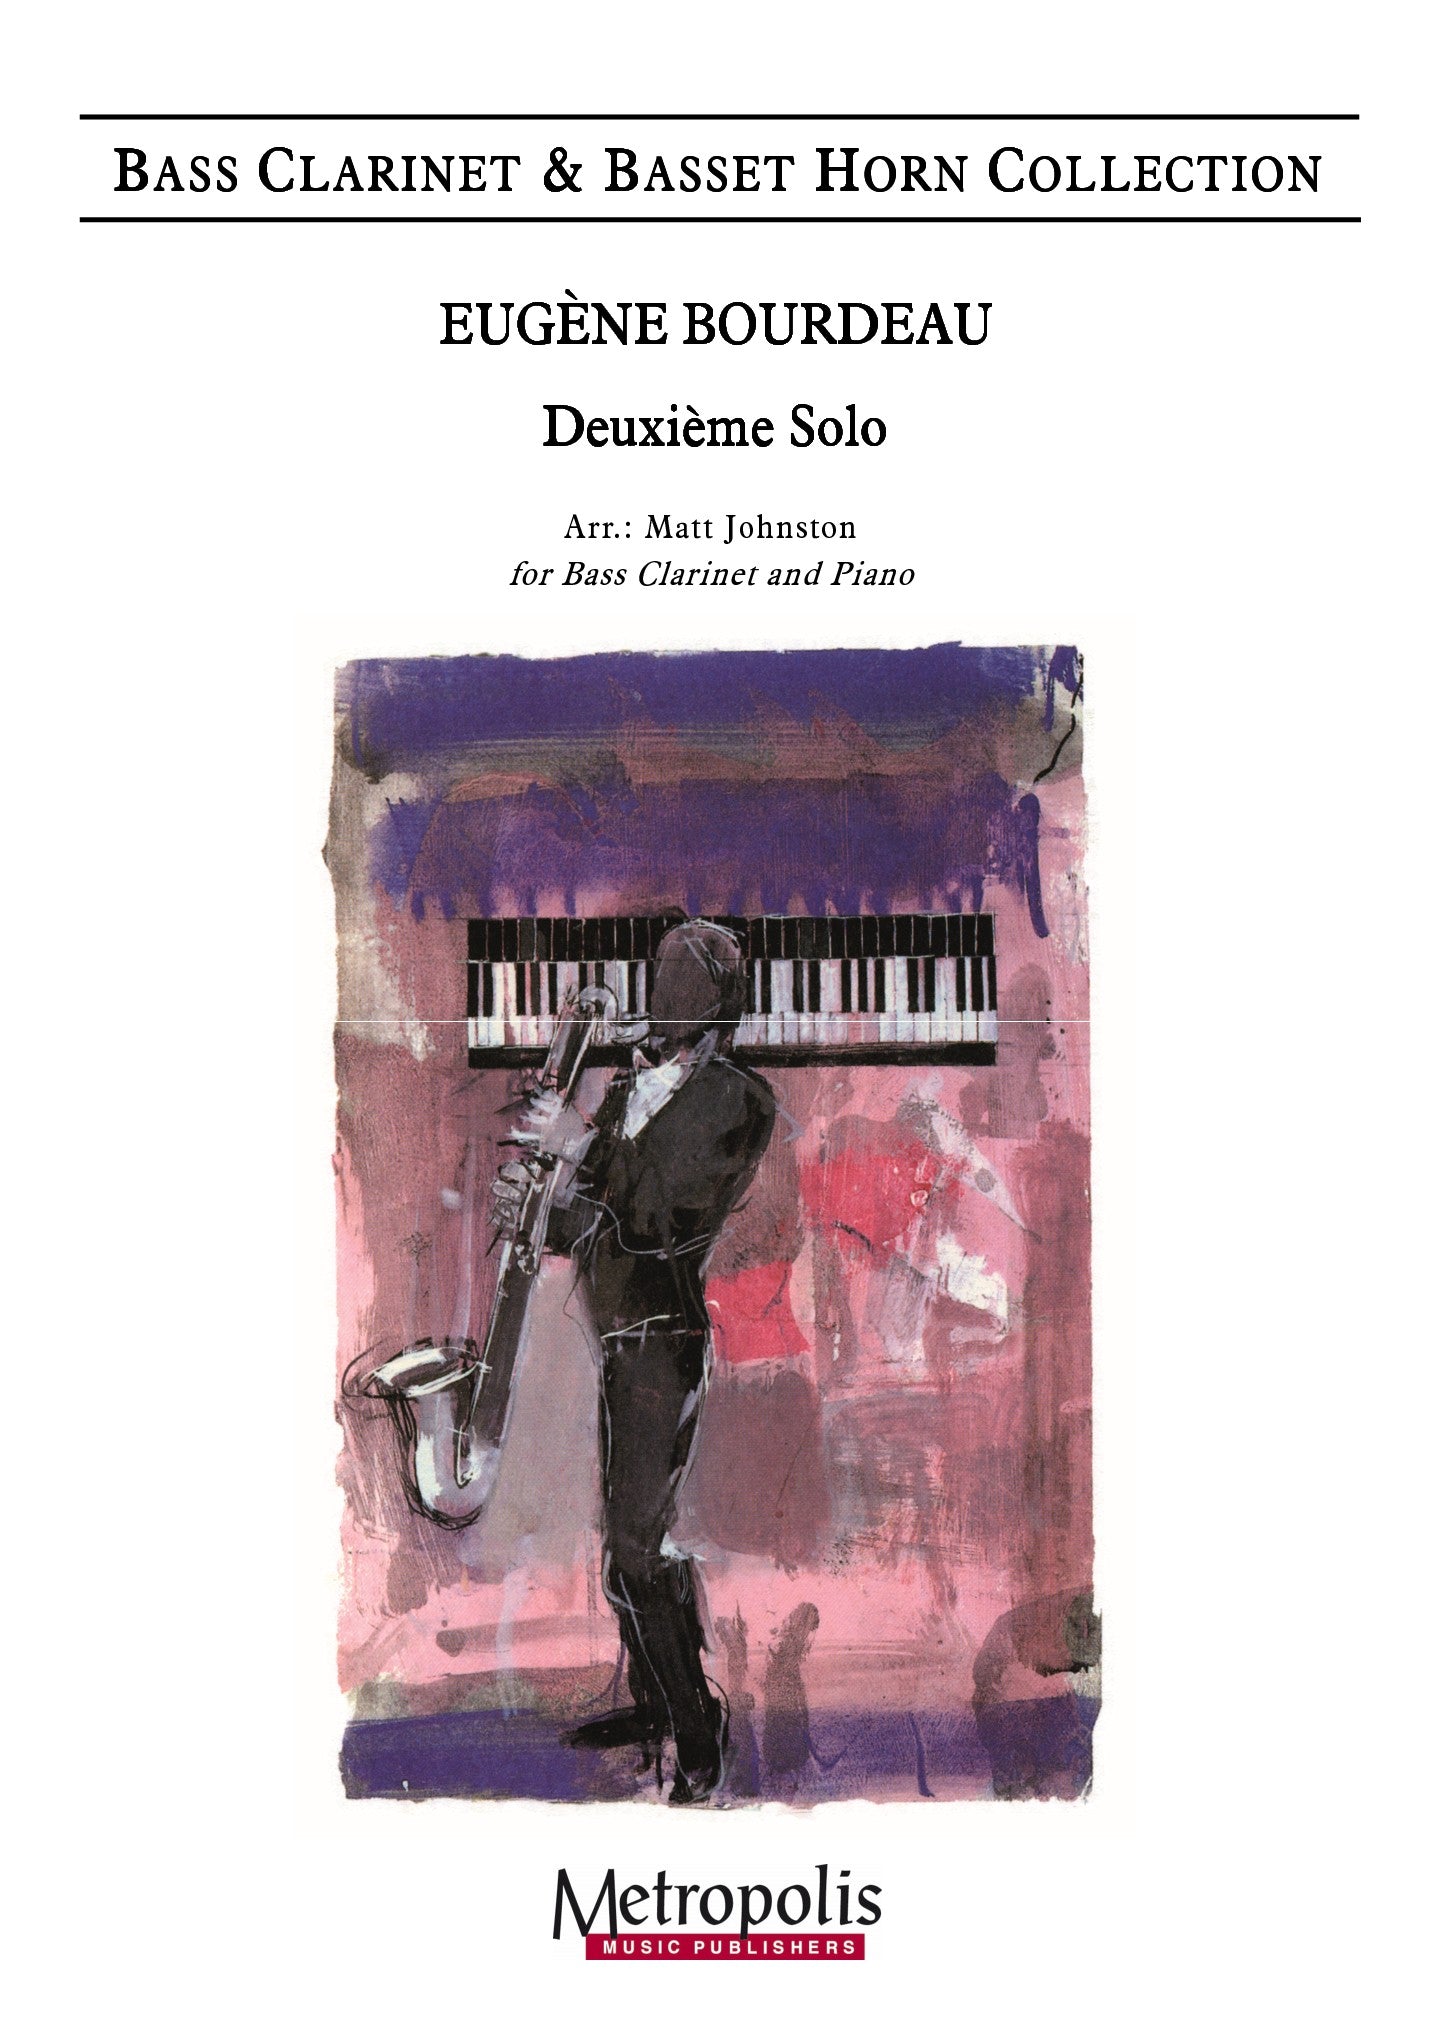 Bourdeau - Deuxieme Solo for Bass Clarinet and Piano